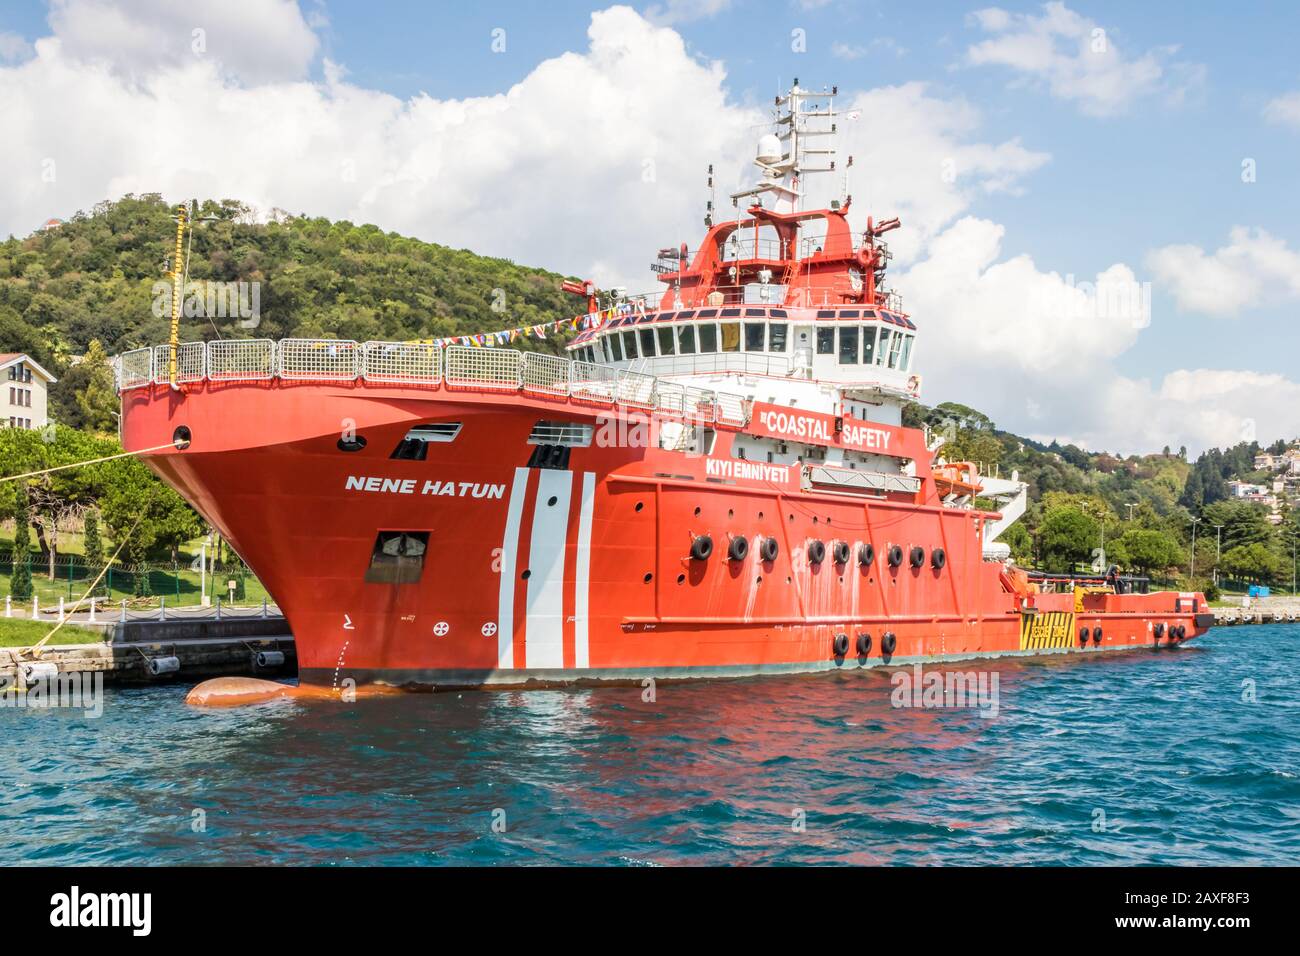 Istanbul, Turkey - August 30th 2019: The Nene Hatun coastal safety vessel. This is a fire fighting boat. Stock Photo